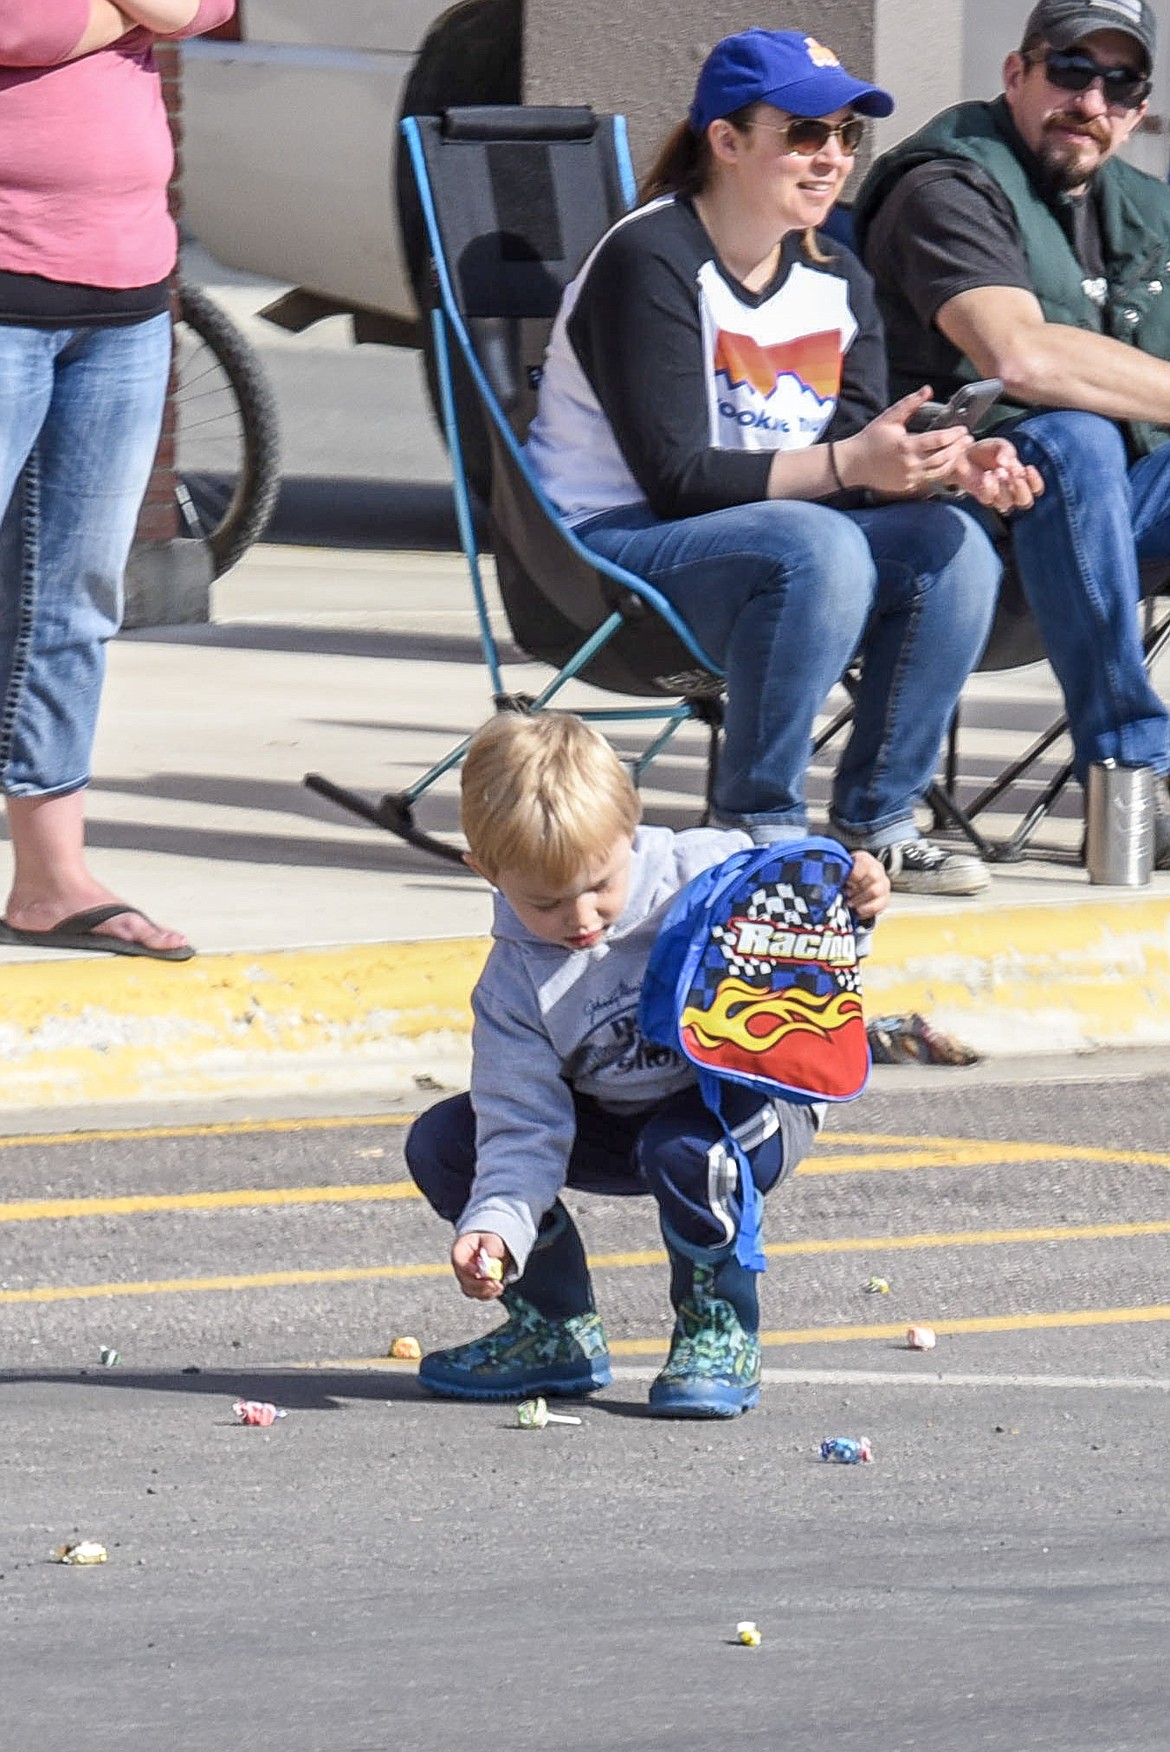 Colt Gassett fills up his pack with candy, during the Opening Day Parade in Libby, Saturday. (Ben Kibbey/The Western News)